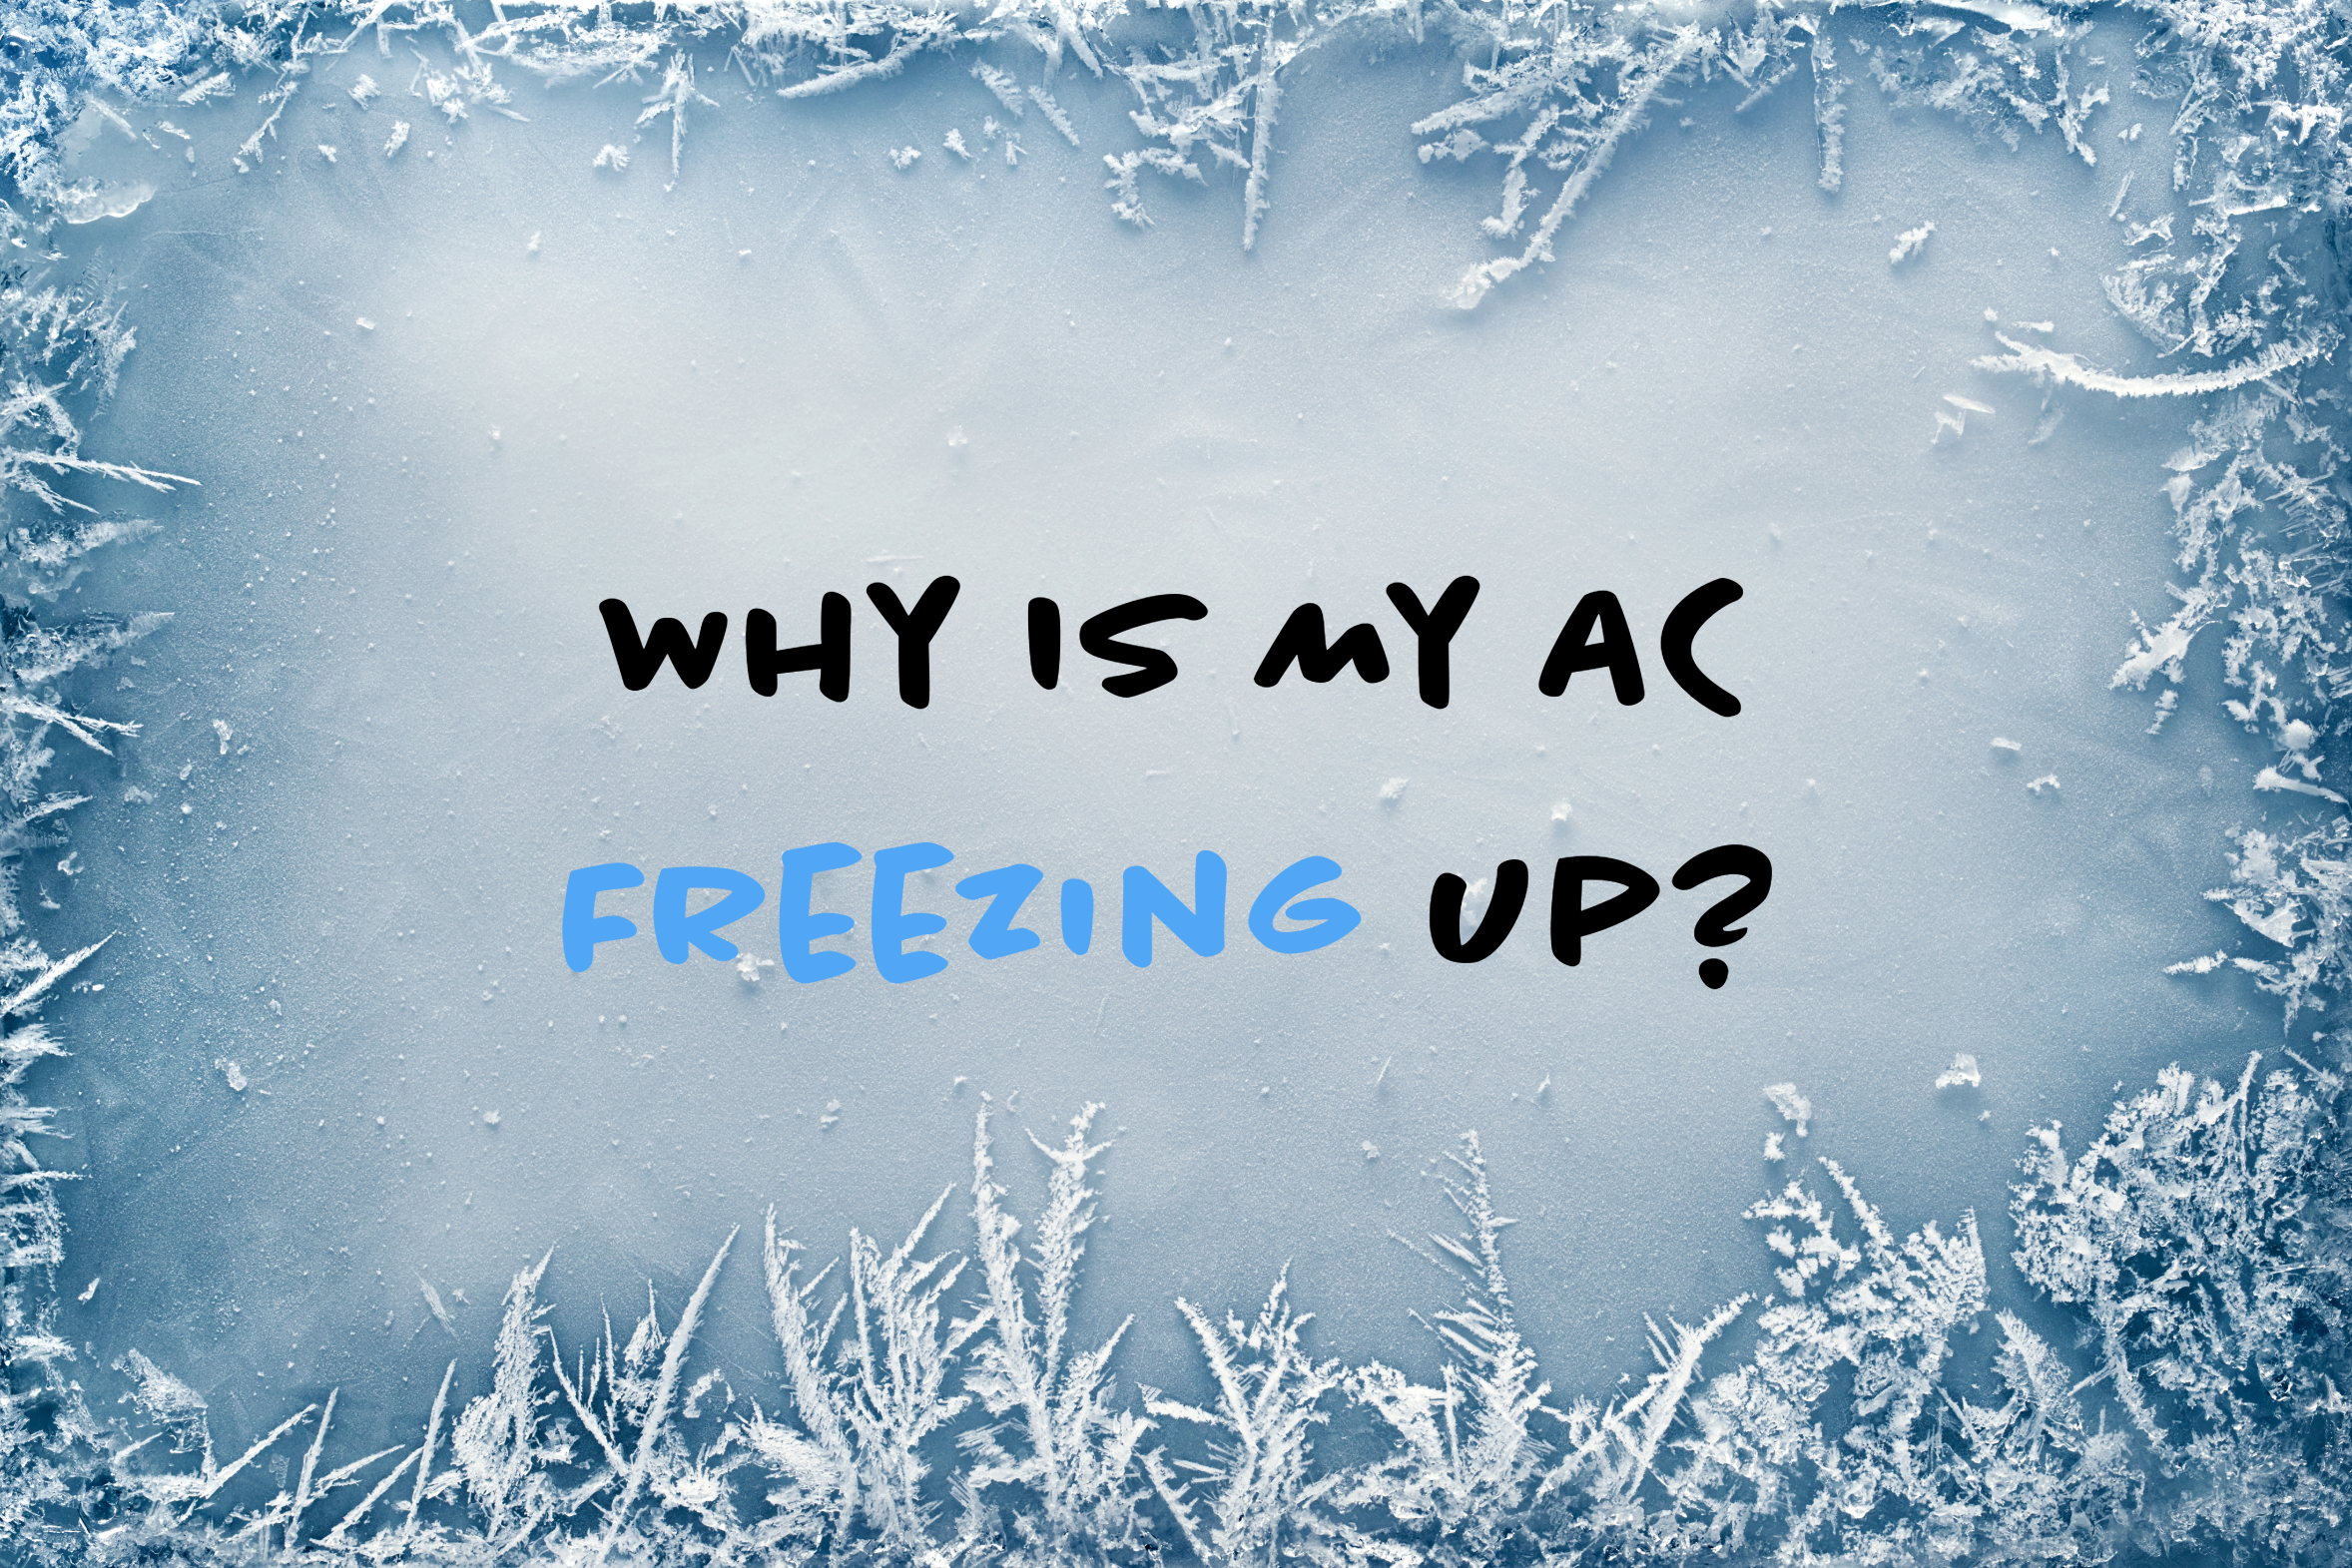 Blog on how to troubleshoot you AC when it is freezing up.